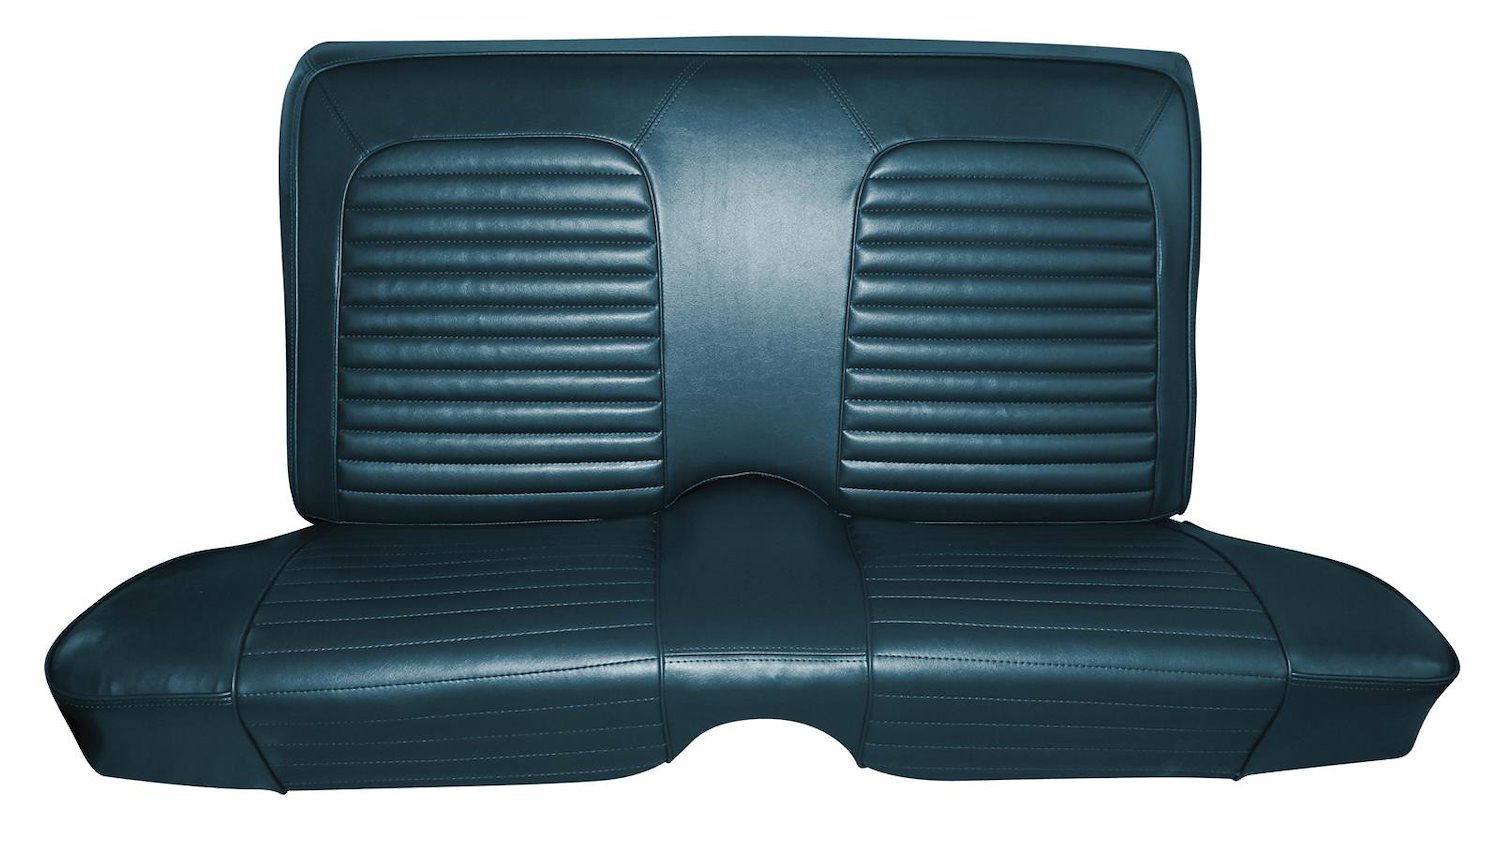 1966 Chevrolet Impala and Super Sport Coupe Interior Rear Bench Seat Upholstery Set